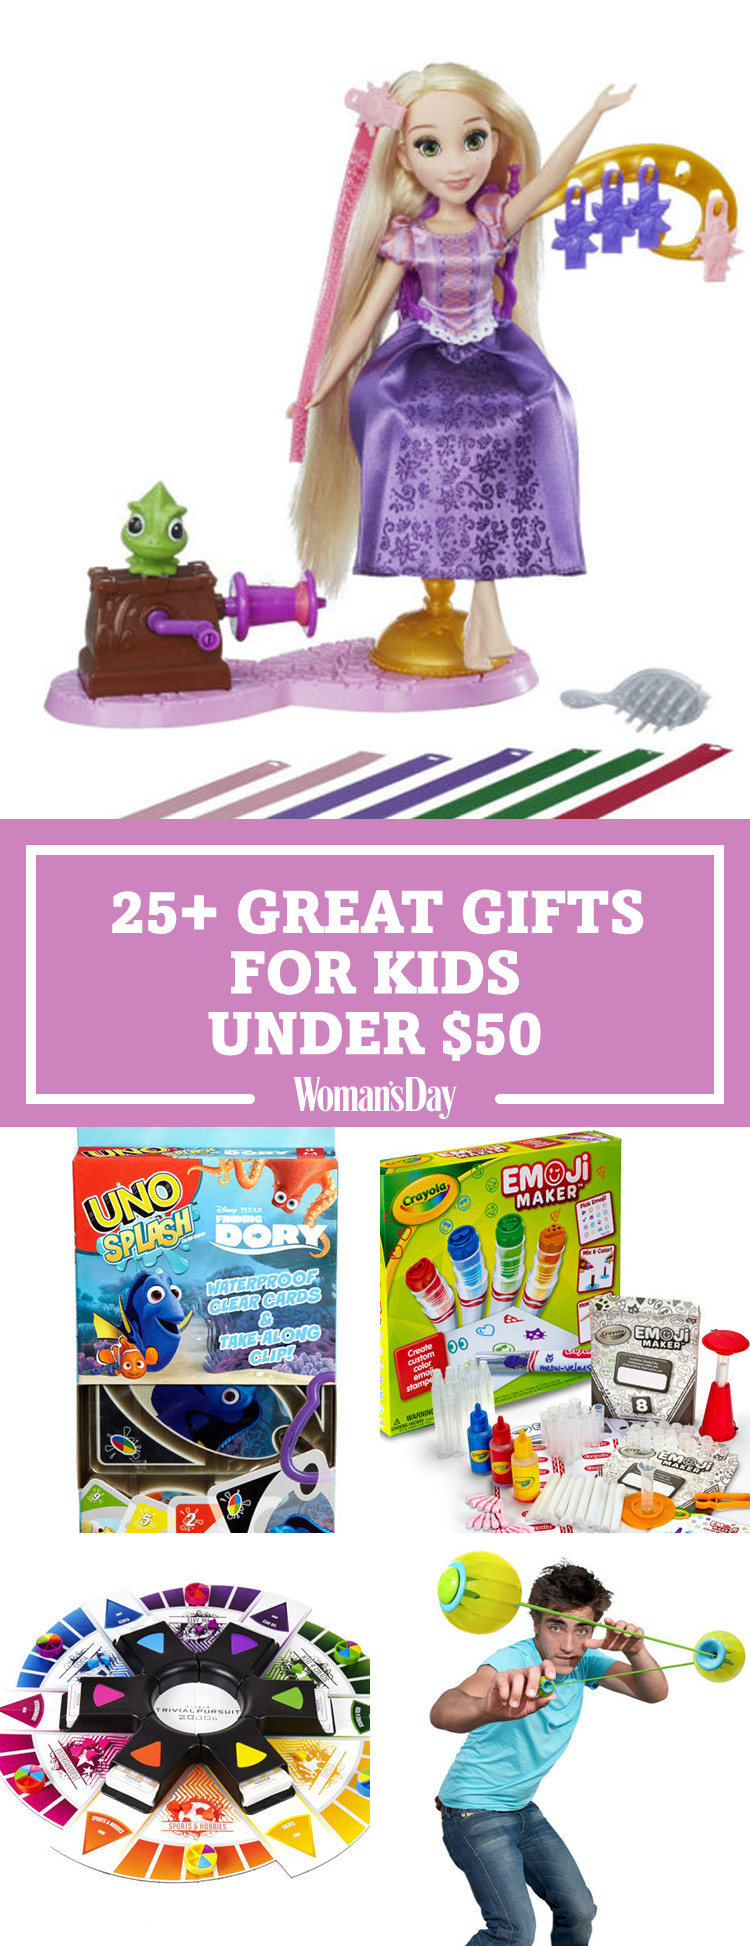 Holiday Gift Ideas For Kids
 30 Best Christmas Gifts for Kids 2017 Holiday Gift Ideas